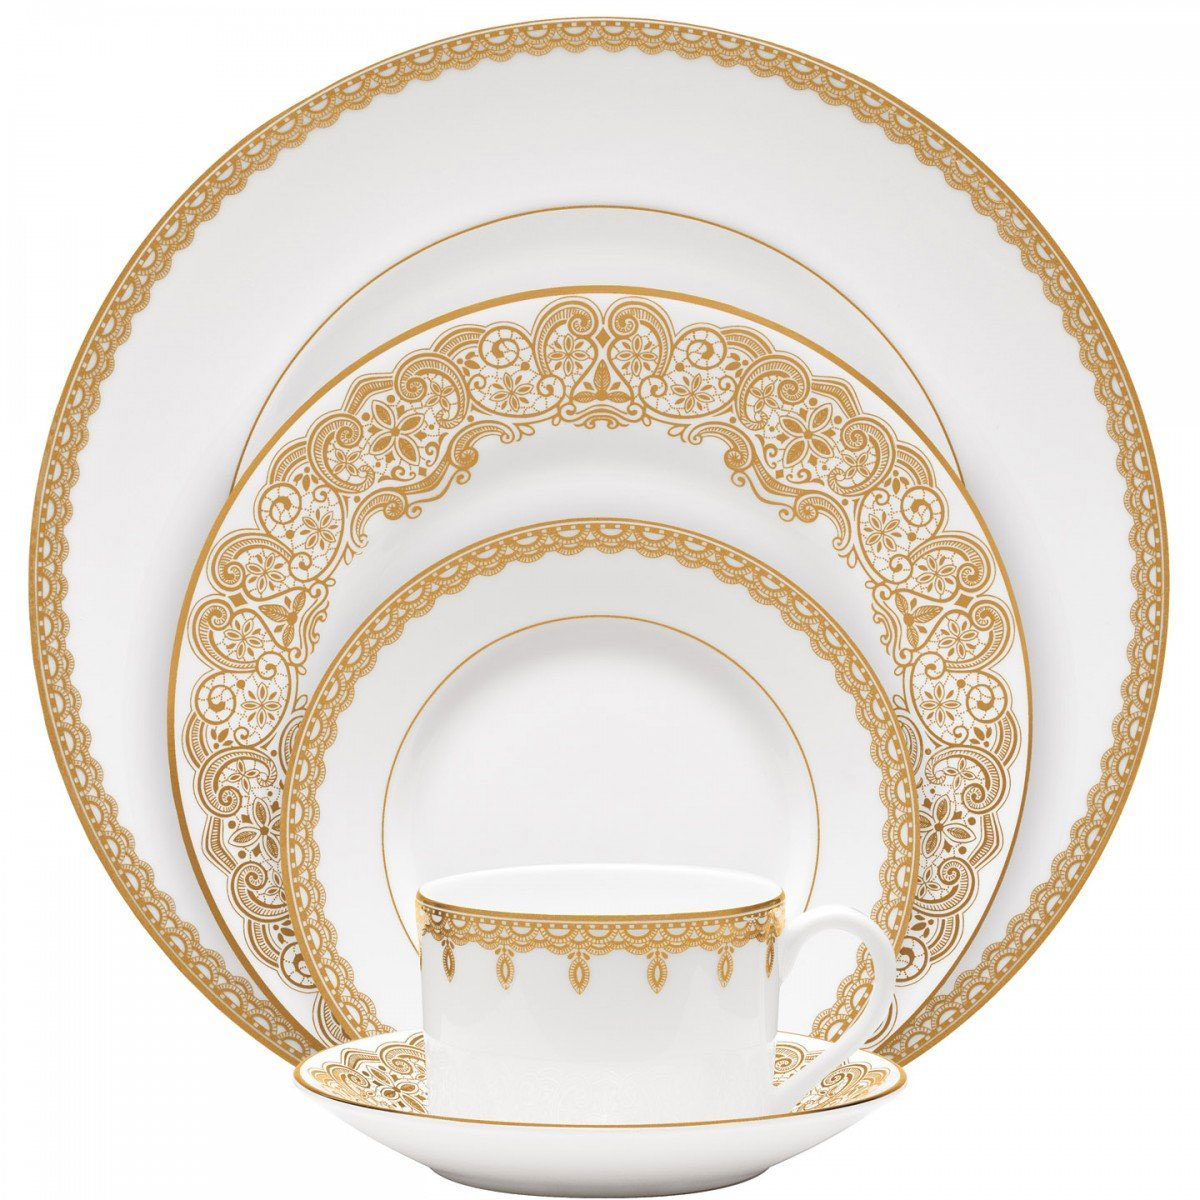 Waterford China Lismore Lace Gold, 5 Piece Place Setting